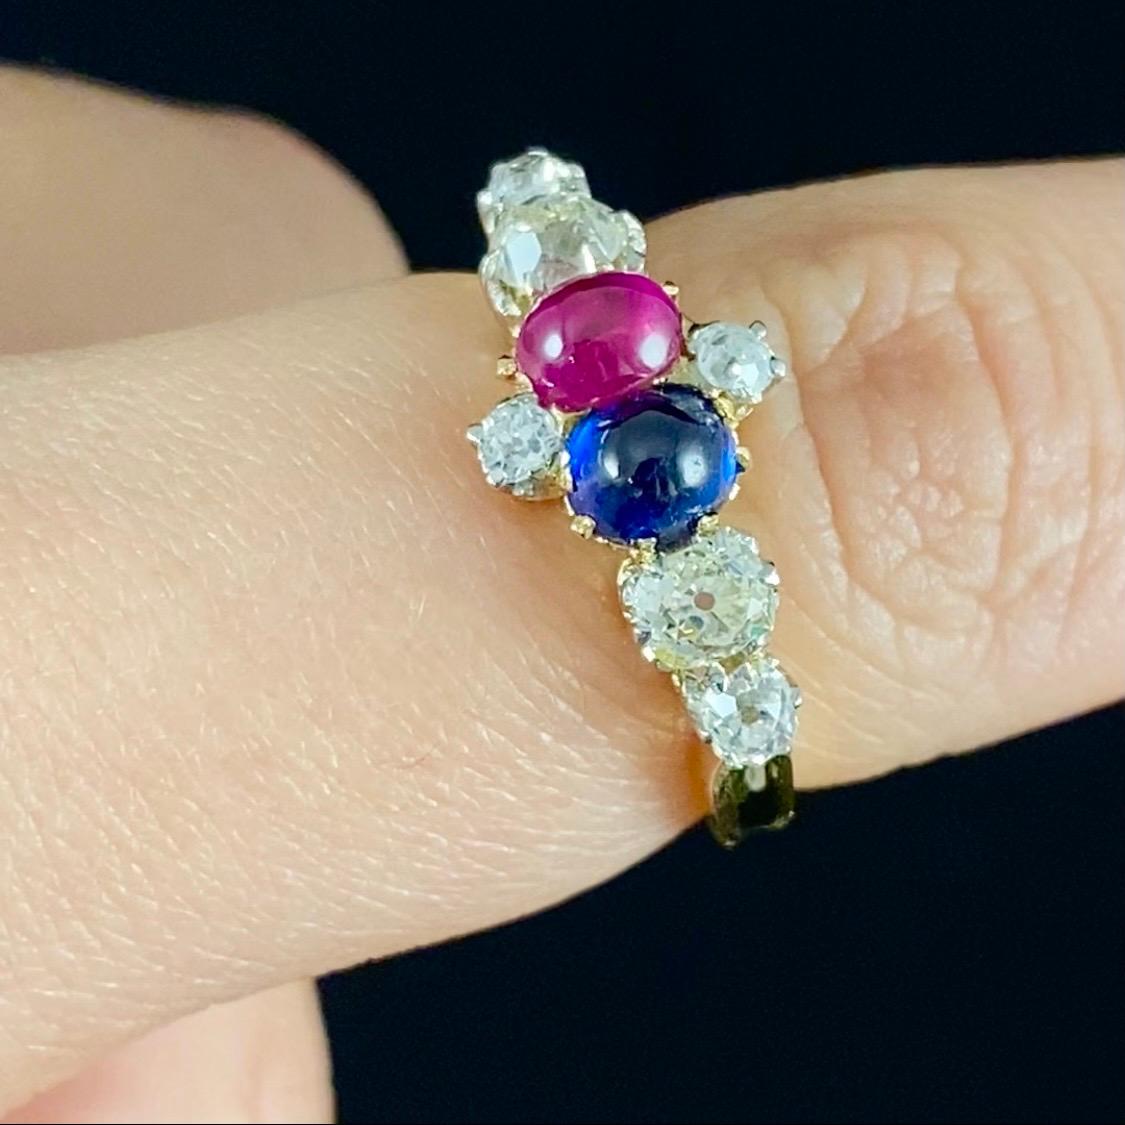 Cabochon Antique Edwardian Burmese Ruby Sapphire Old Diamond Engagement Ring Gold, 1910s